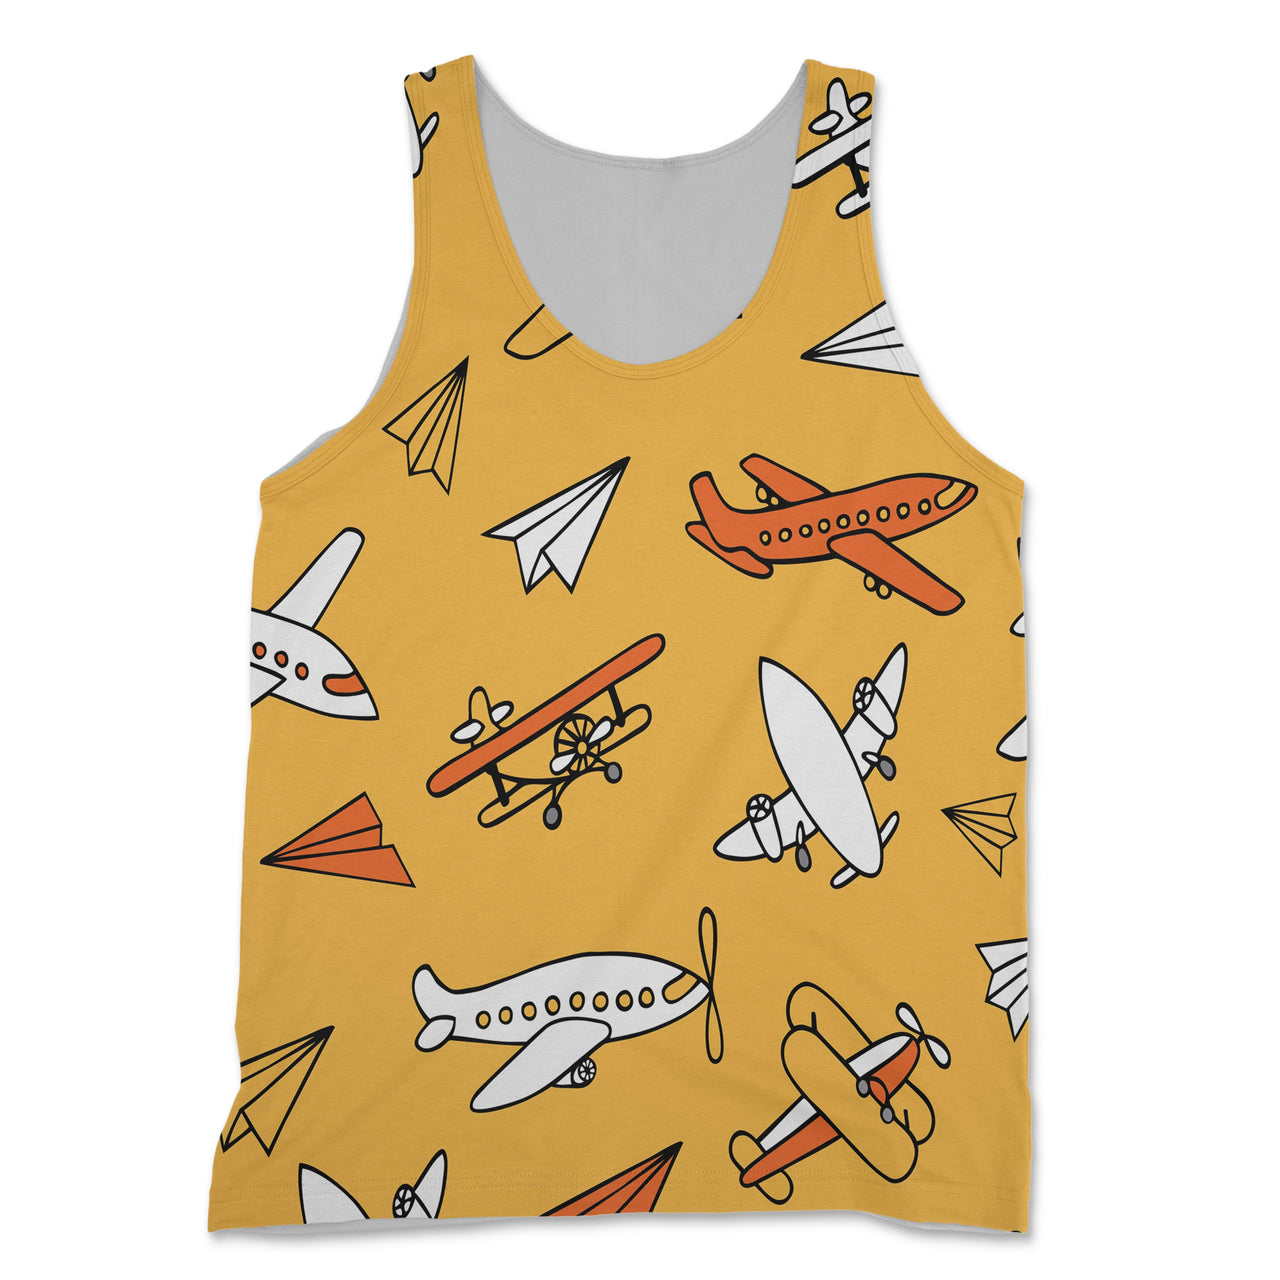 Super Drawings of Airplanes Designed 3D Tank Tops